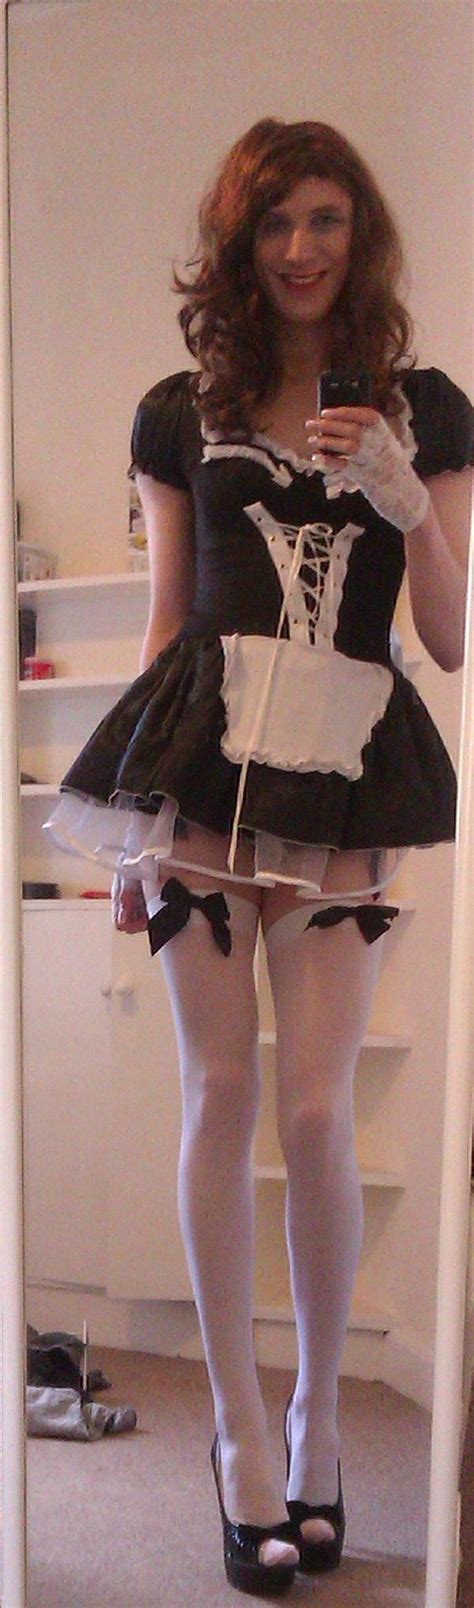 French Maid By Mezuki111 On Deviantart French Maid Dress Maid Outfit French Maid